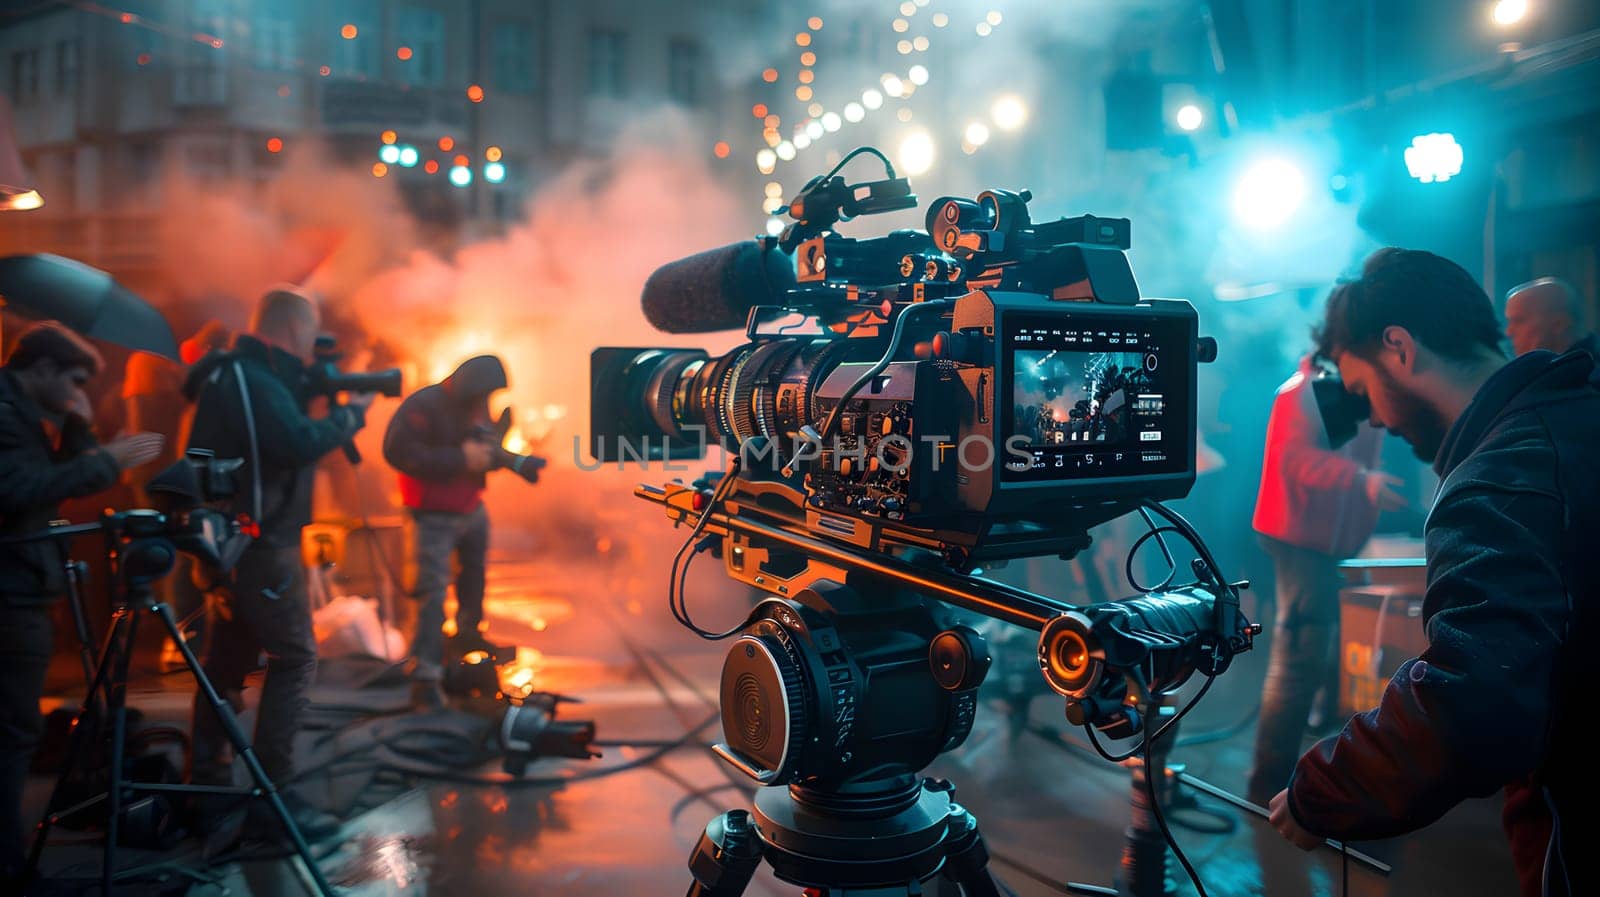 A crowd gathers around a camera on a tripod, capturing an event. Smoke and heat fill the air, creating an atmosphere of entertainment and art